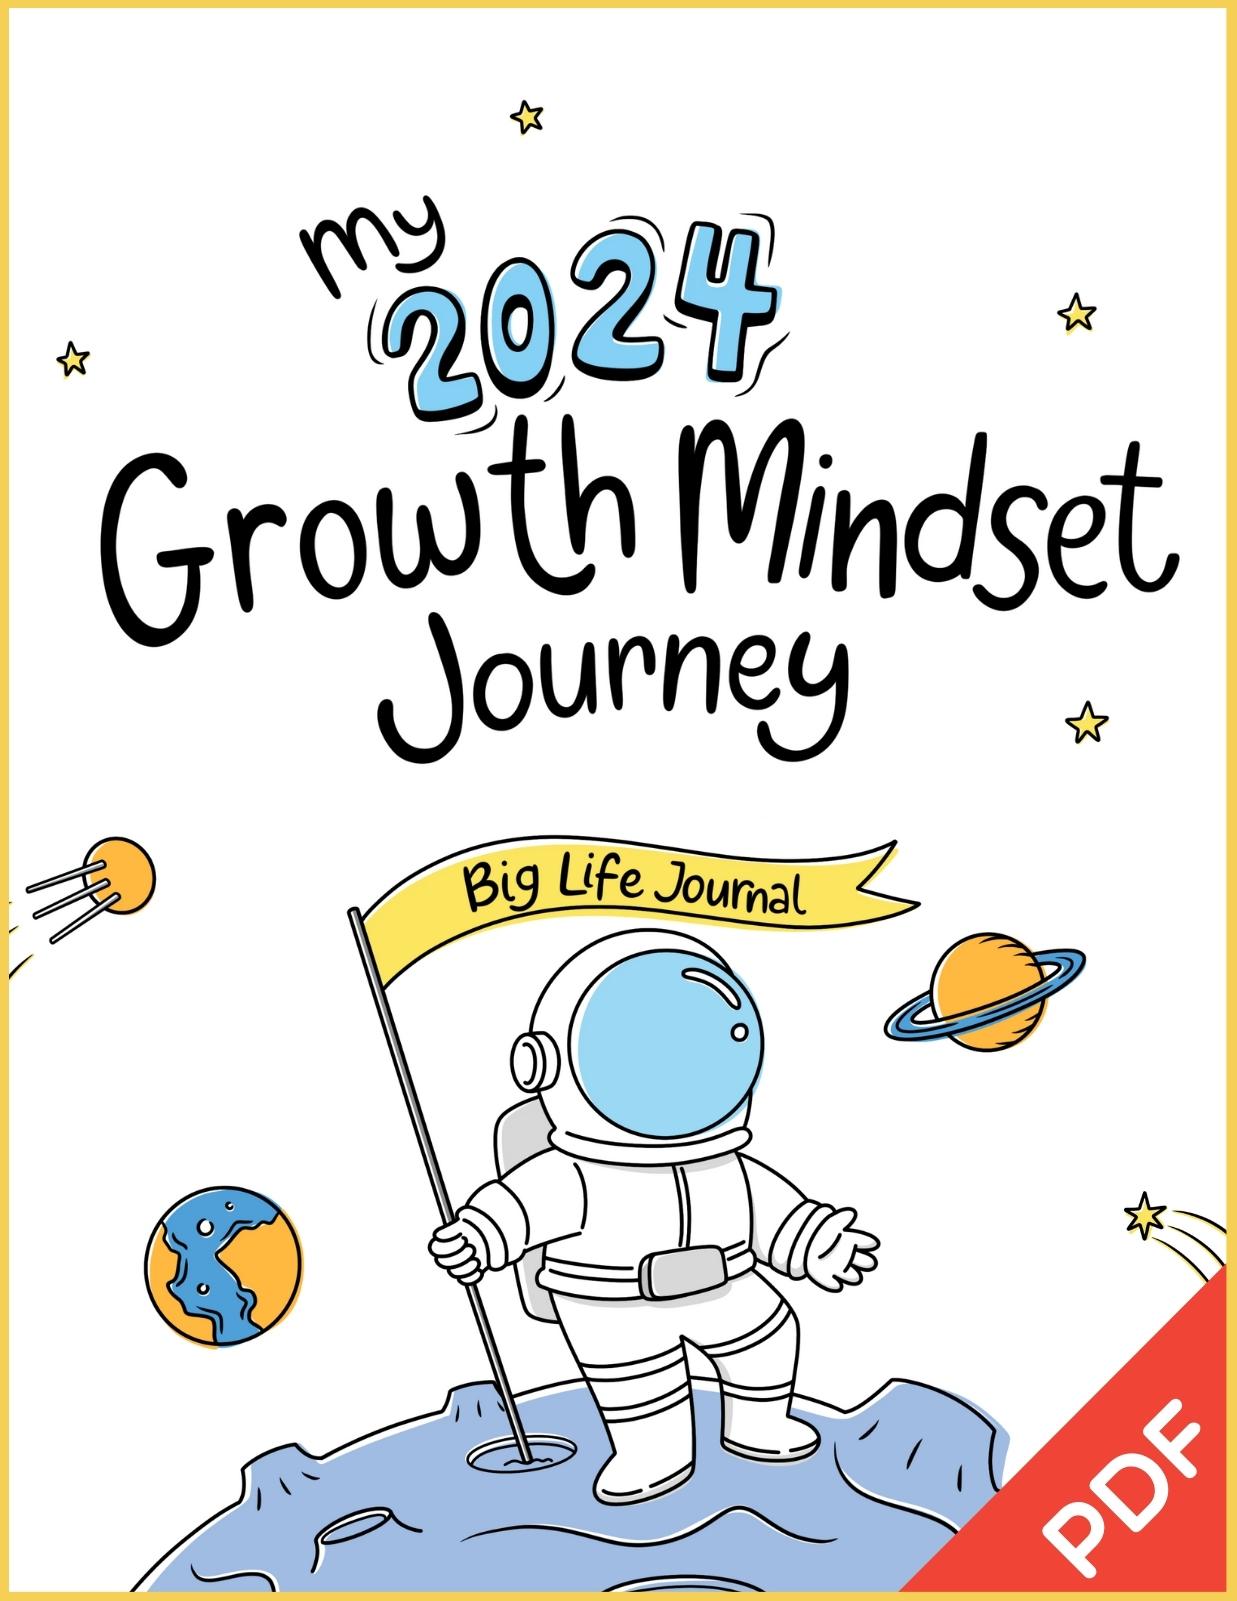 Episode 1 - Discover Growth Mindset and How to Believe in Yourself – Big  Life Journal